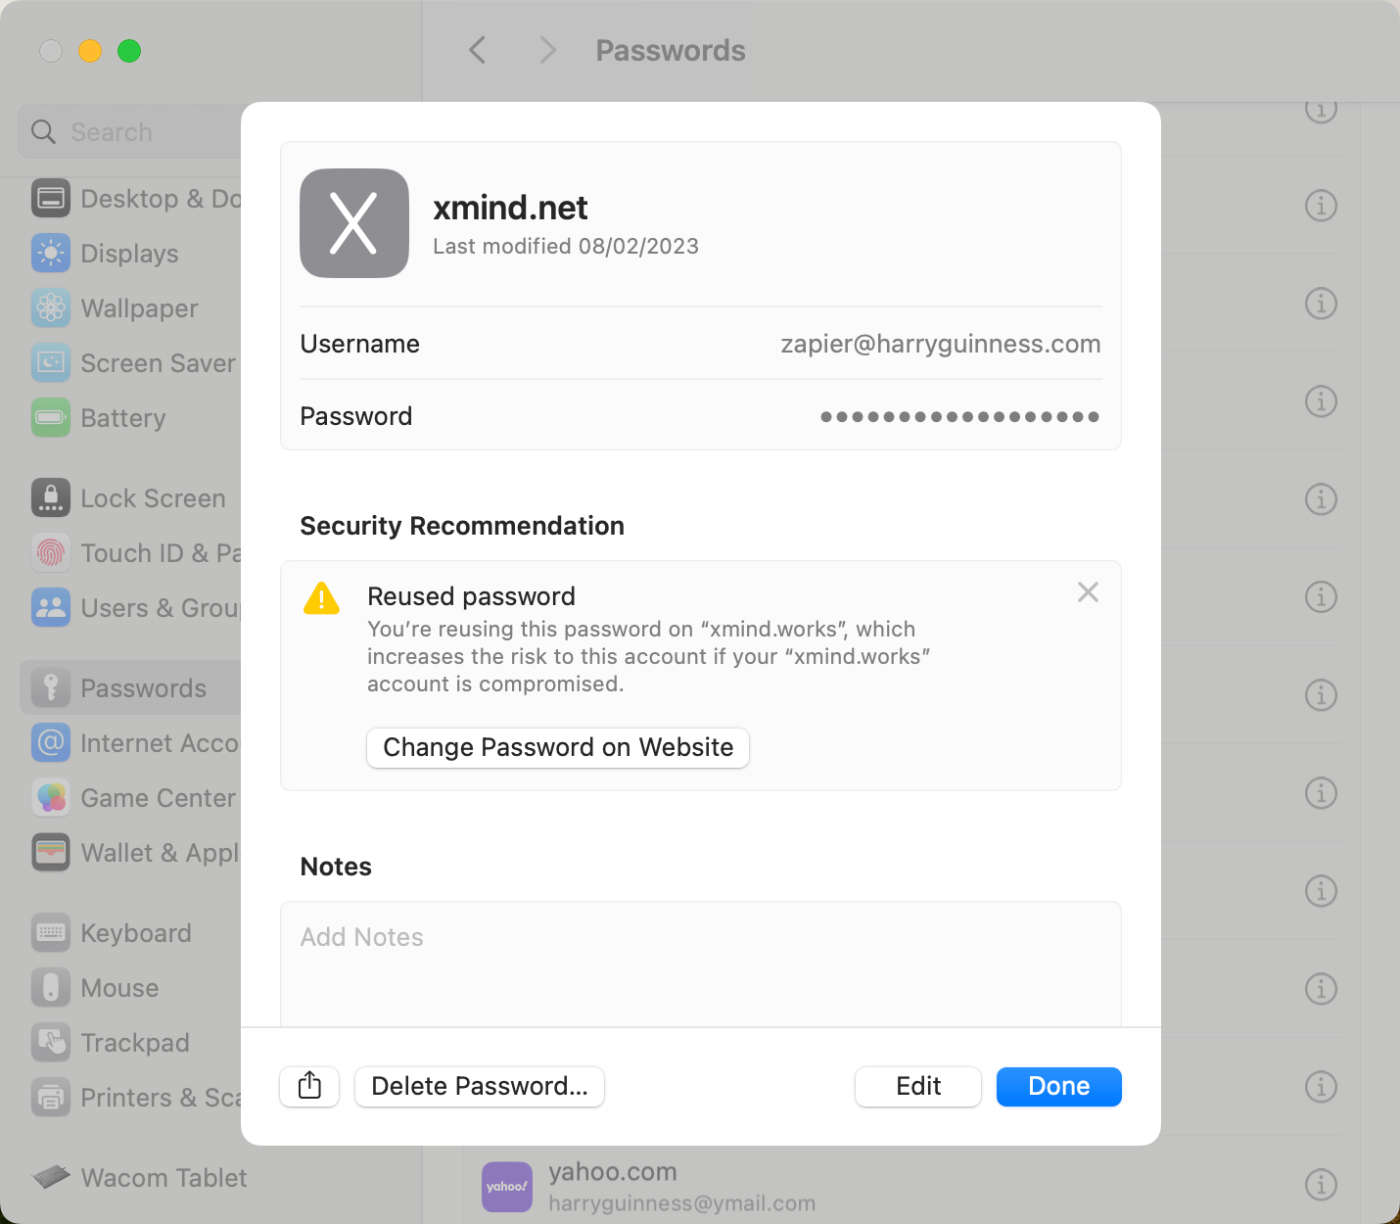 iCloud Keychain, our pick for the best password manager for Apple products